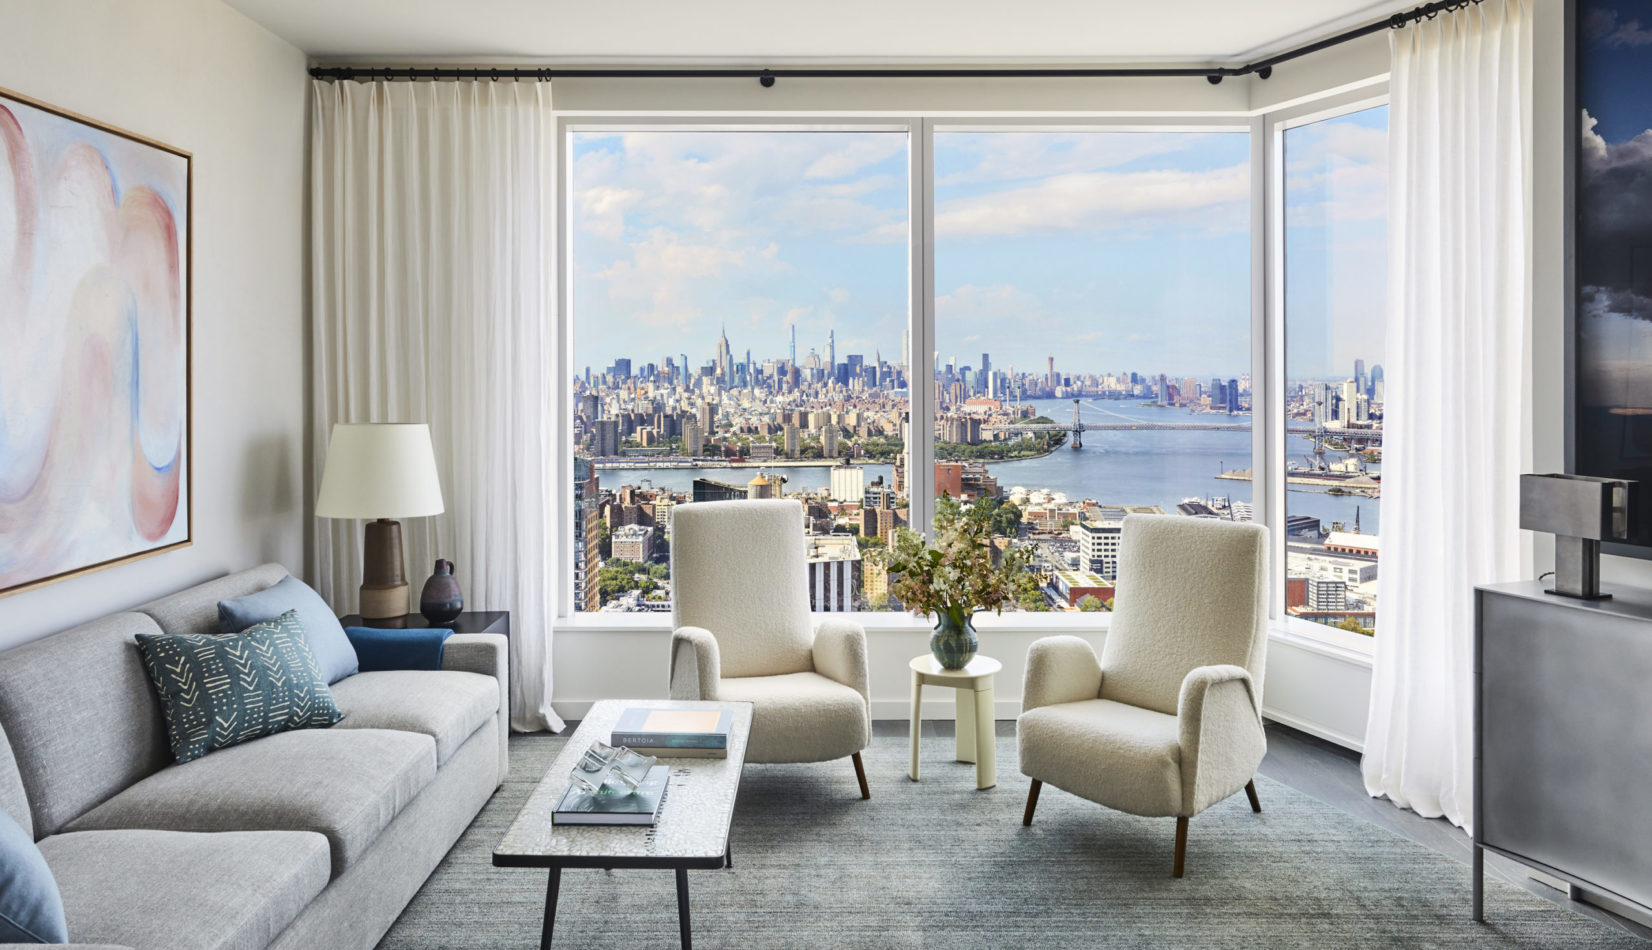 Interior view of Brooklyn Point residence living room with skyline window view. Has full furniture and white curtains.